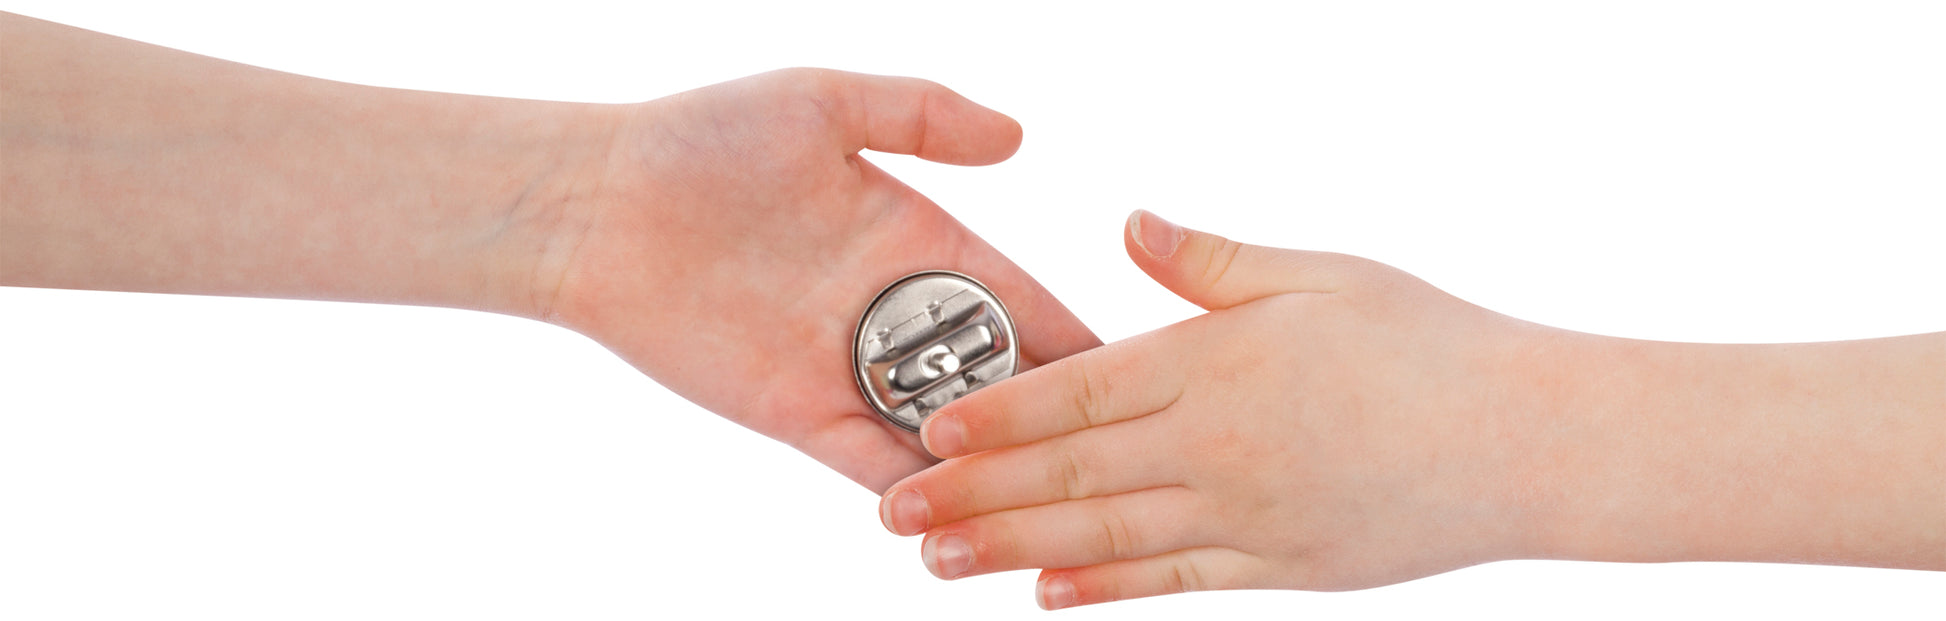 Two hands shaking/using hand buzzer 